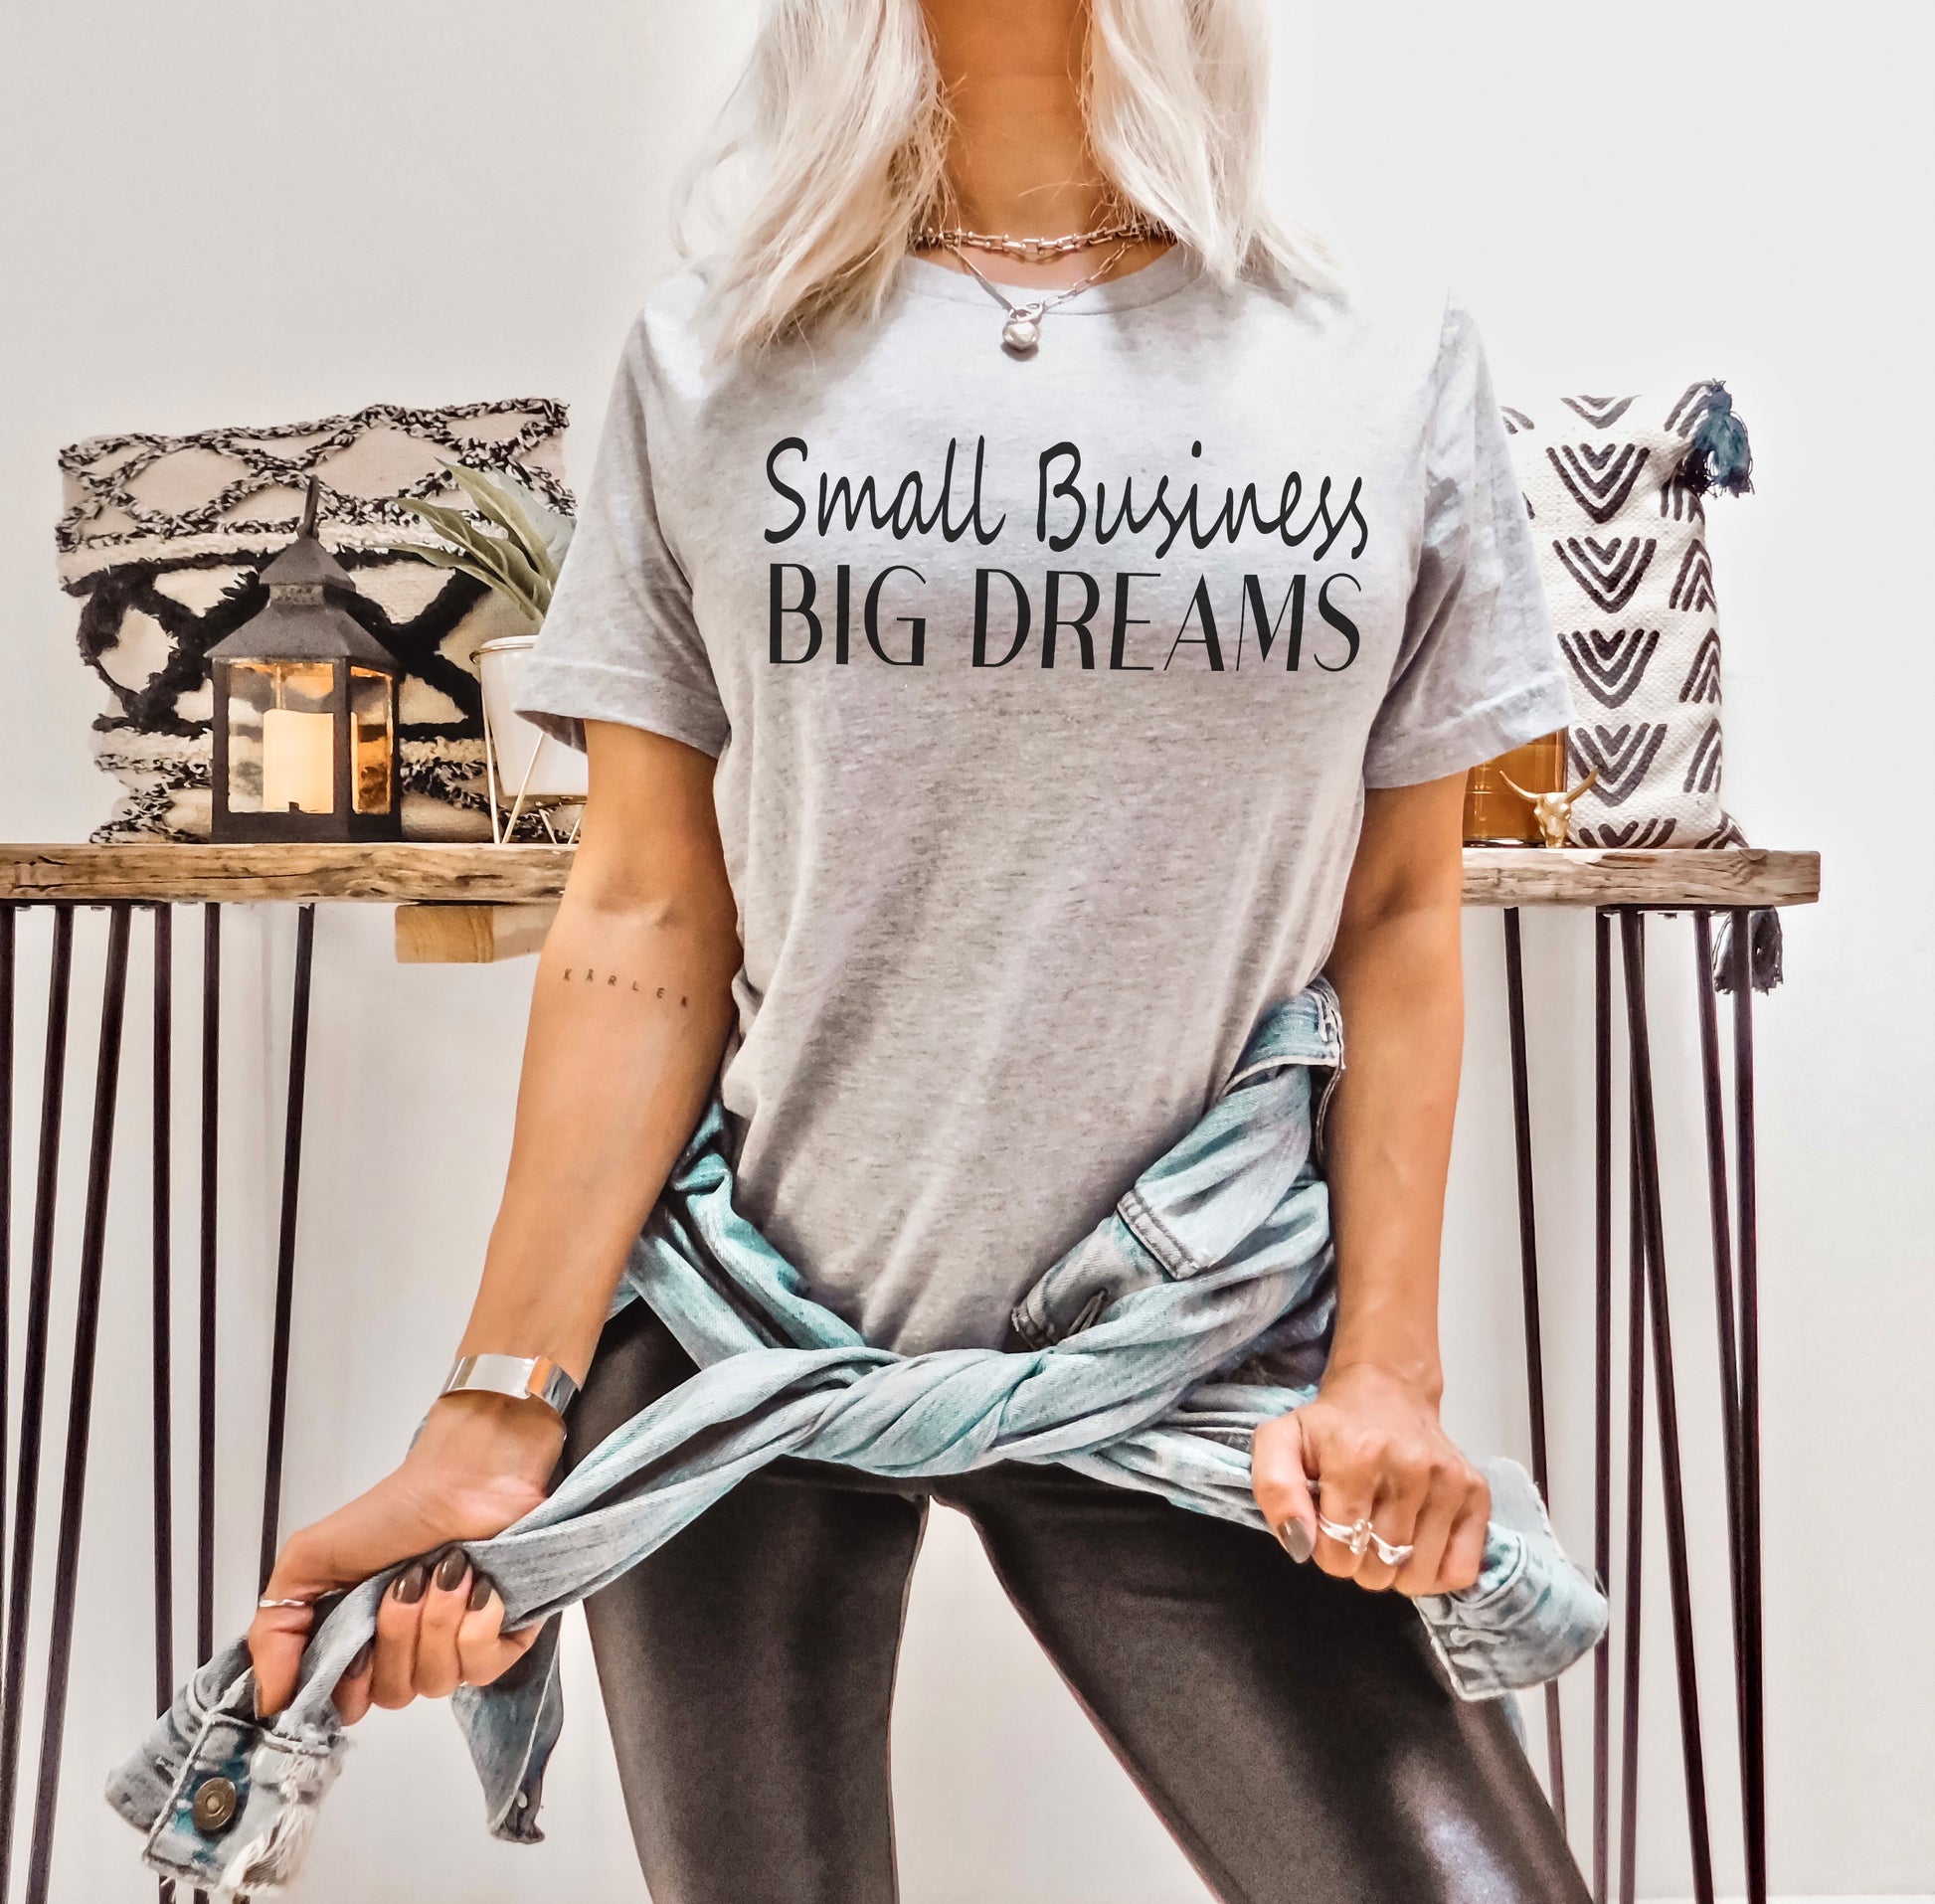 Designs by Prim Small Business Big Dreams Soft Unisex T-Shirt | Building Empire She-EO Hustle Entrepreneur Babes Supporting Owner Self Made Paid Hustler Top